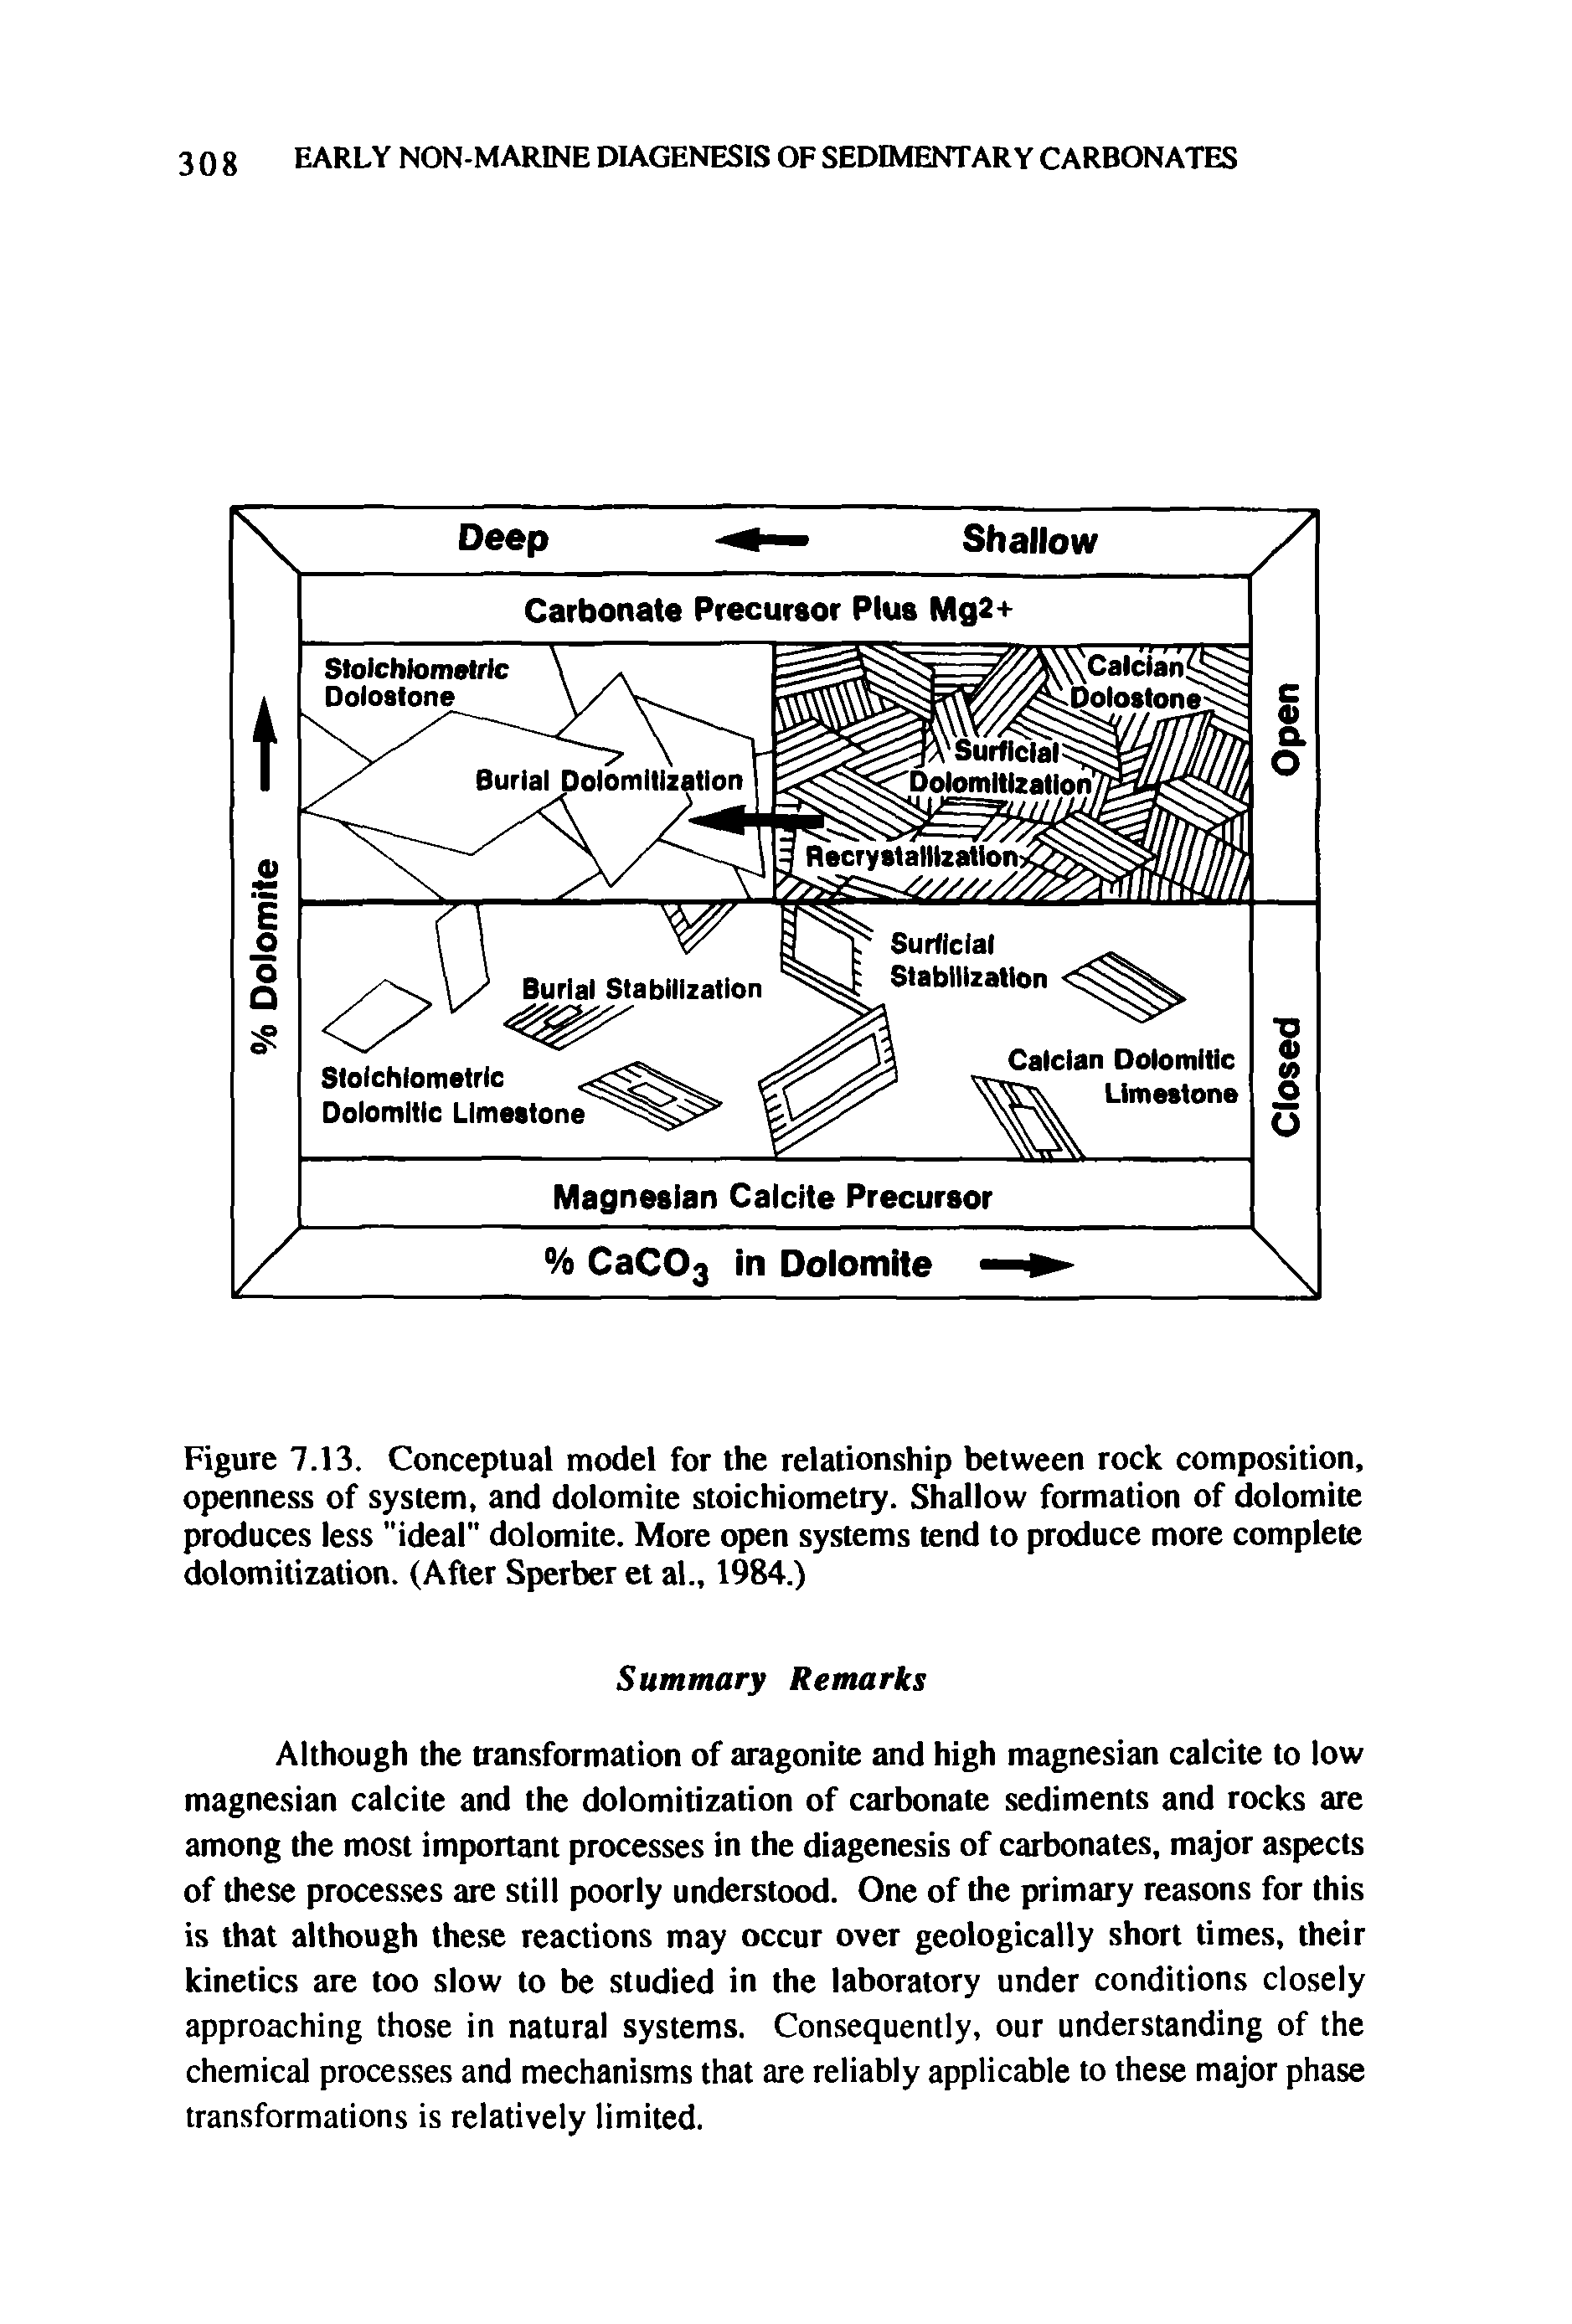 Figure 7.13. Conceptual model for the relationship between rock composition, openness of system, and dolomite stoichiometry. Shallow formation of dolomite produces less "ideal" dolomite. More open systems tend to produce more complete dolomitization. (After Sperber et al 1984.)...